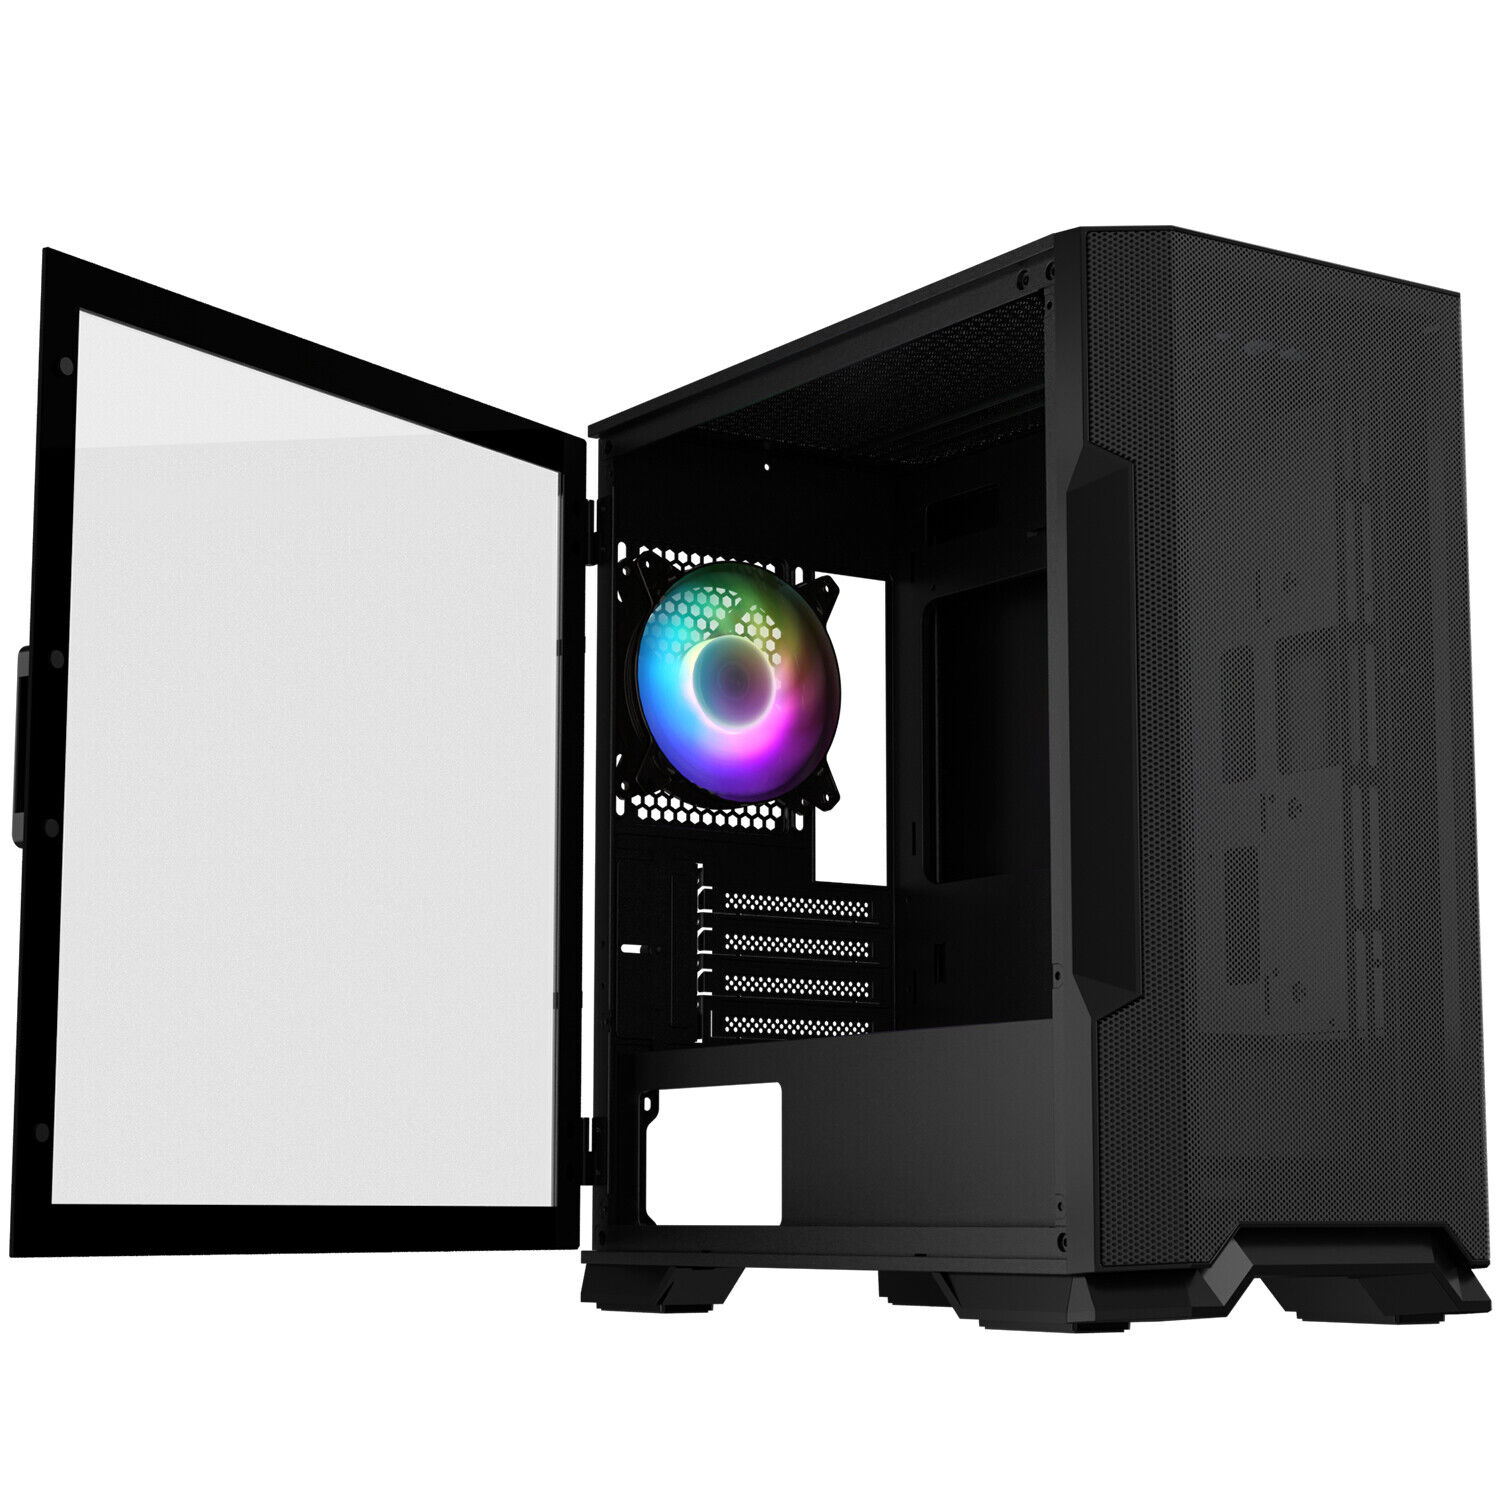 Vetroo M03 Micro ATX Black Gaming PC Case Compact Computer Case Tempered Glass